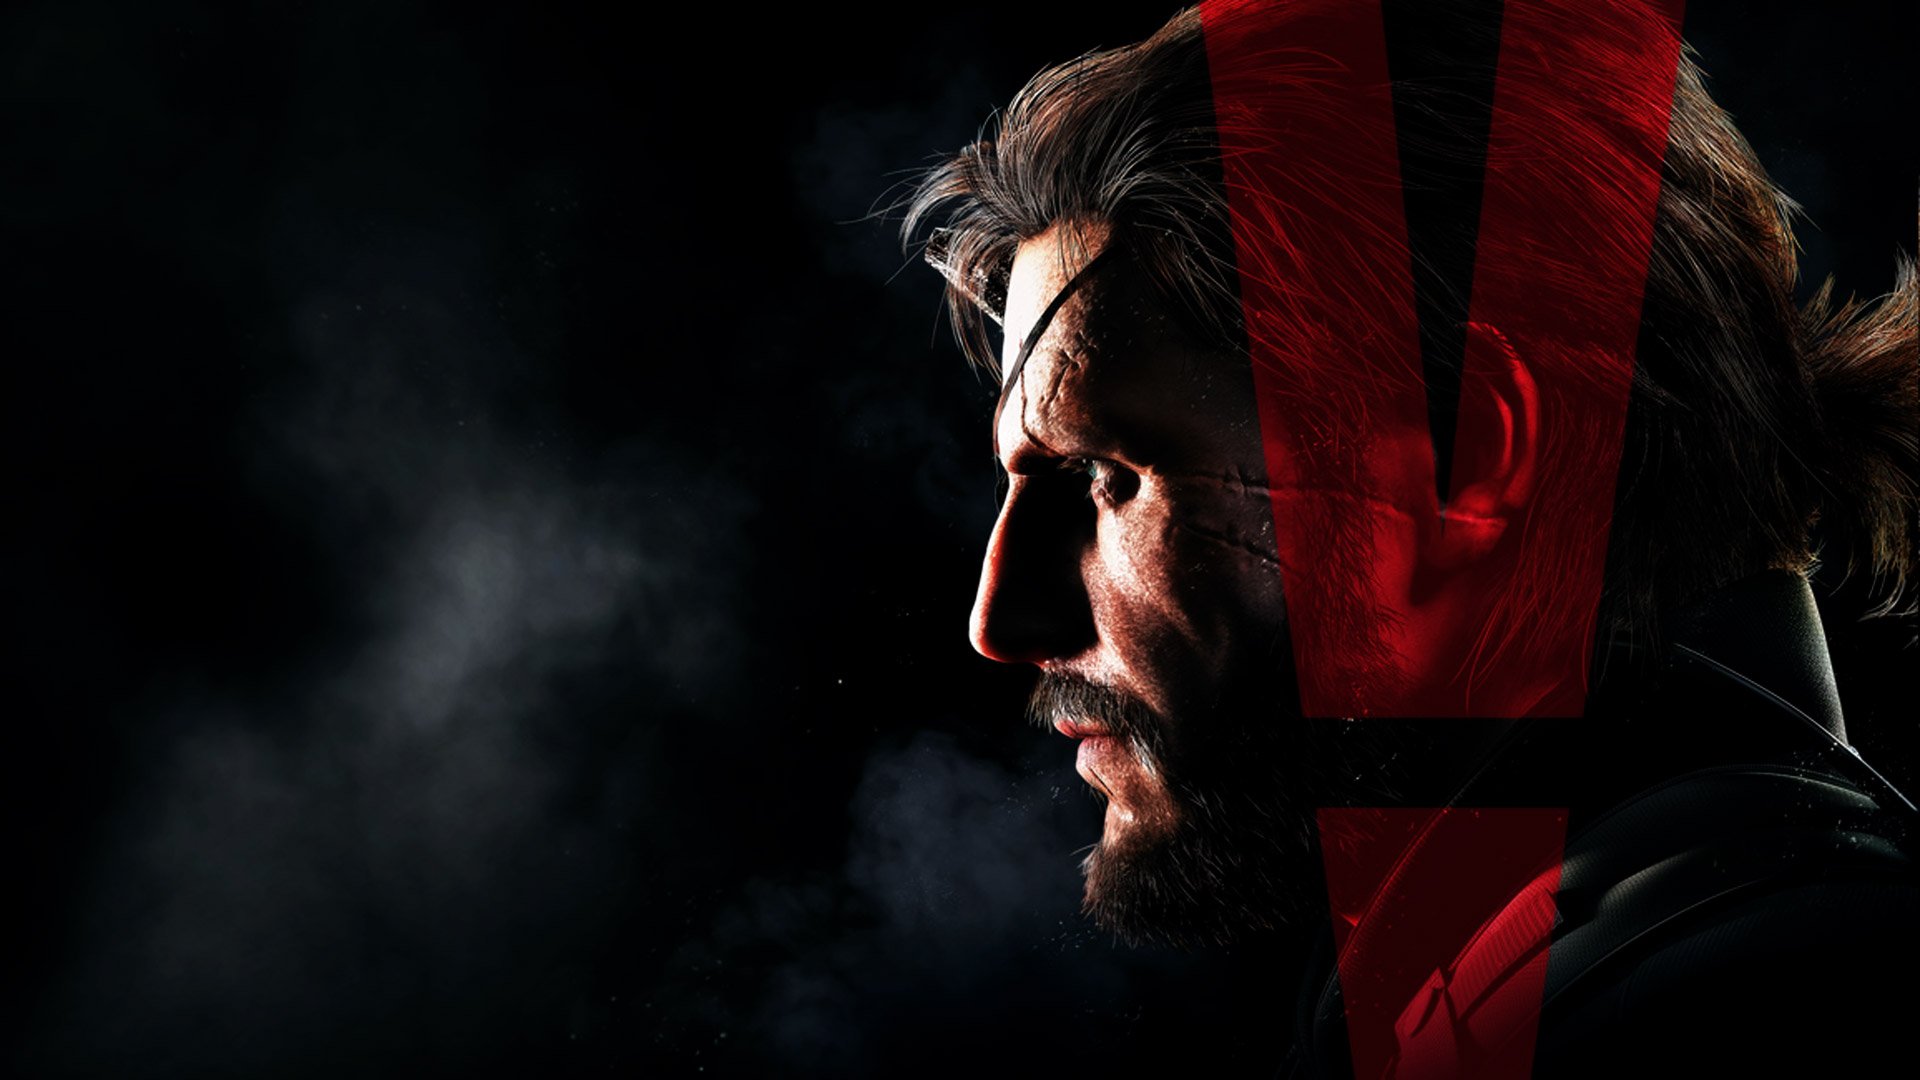 Metal Gear Solid 5 The Phantom Pain Wallpapers Pictures